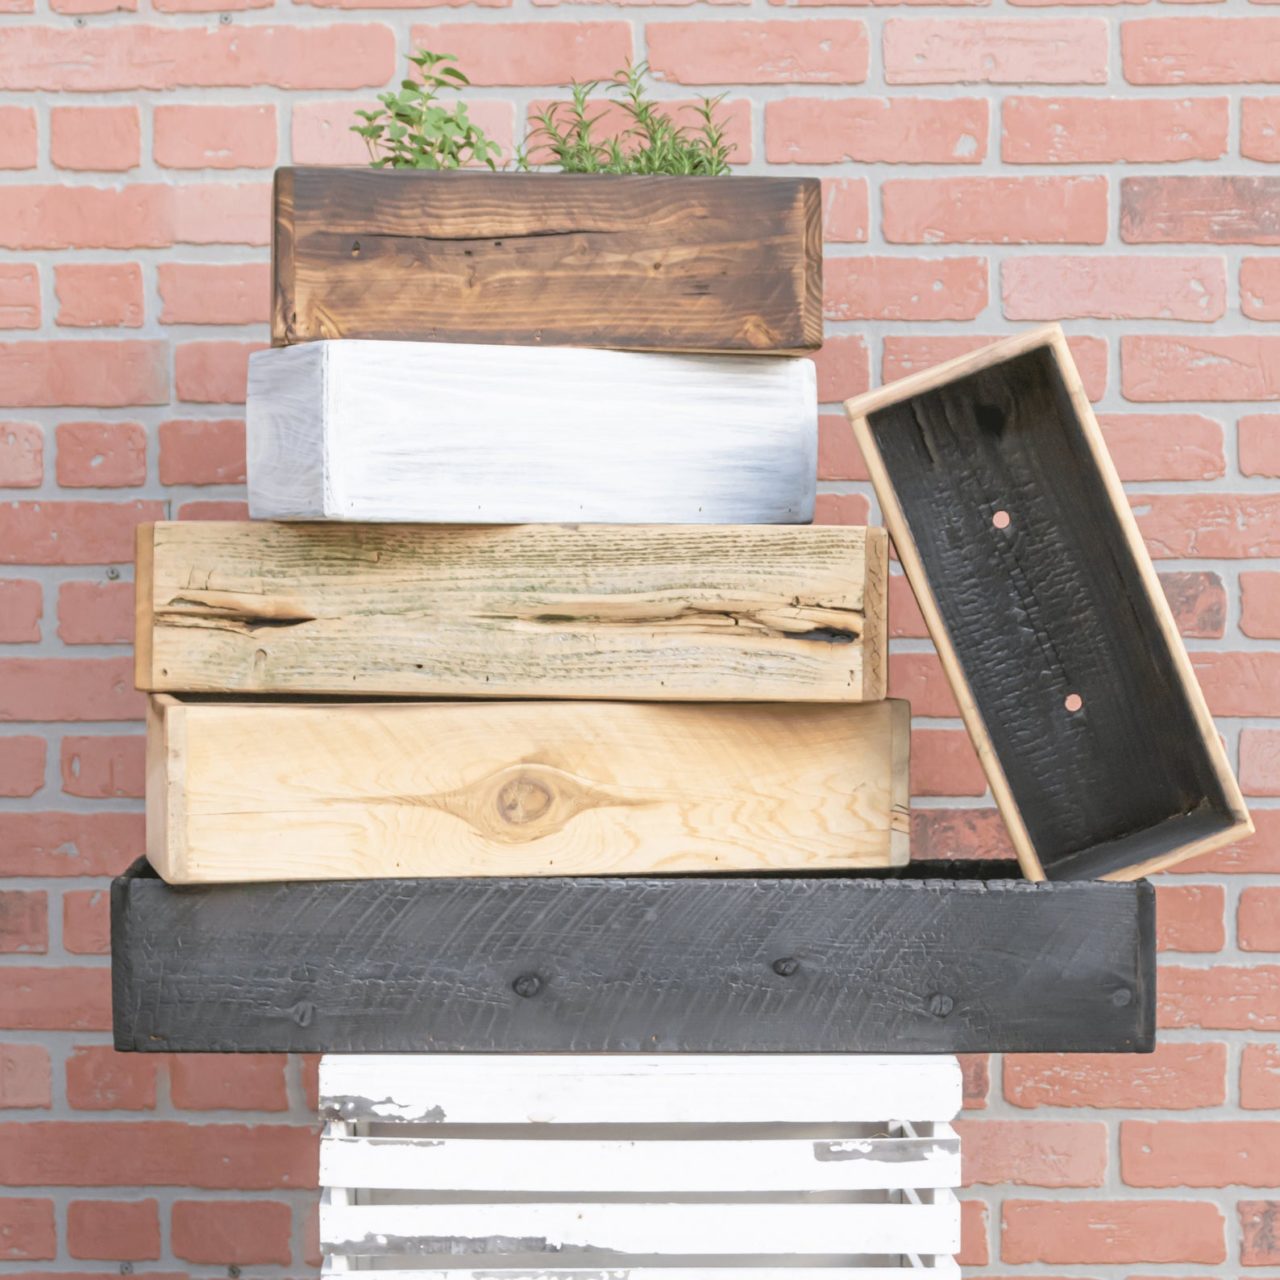 wood planter boxes as backyard wedding supplies and centerpieces